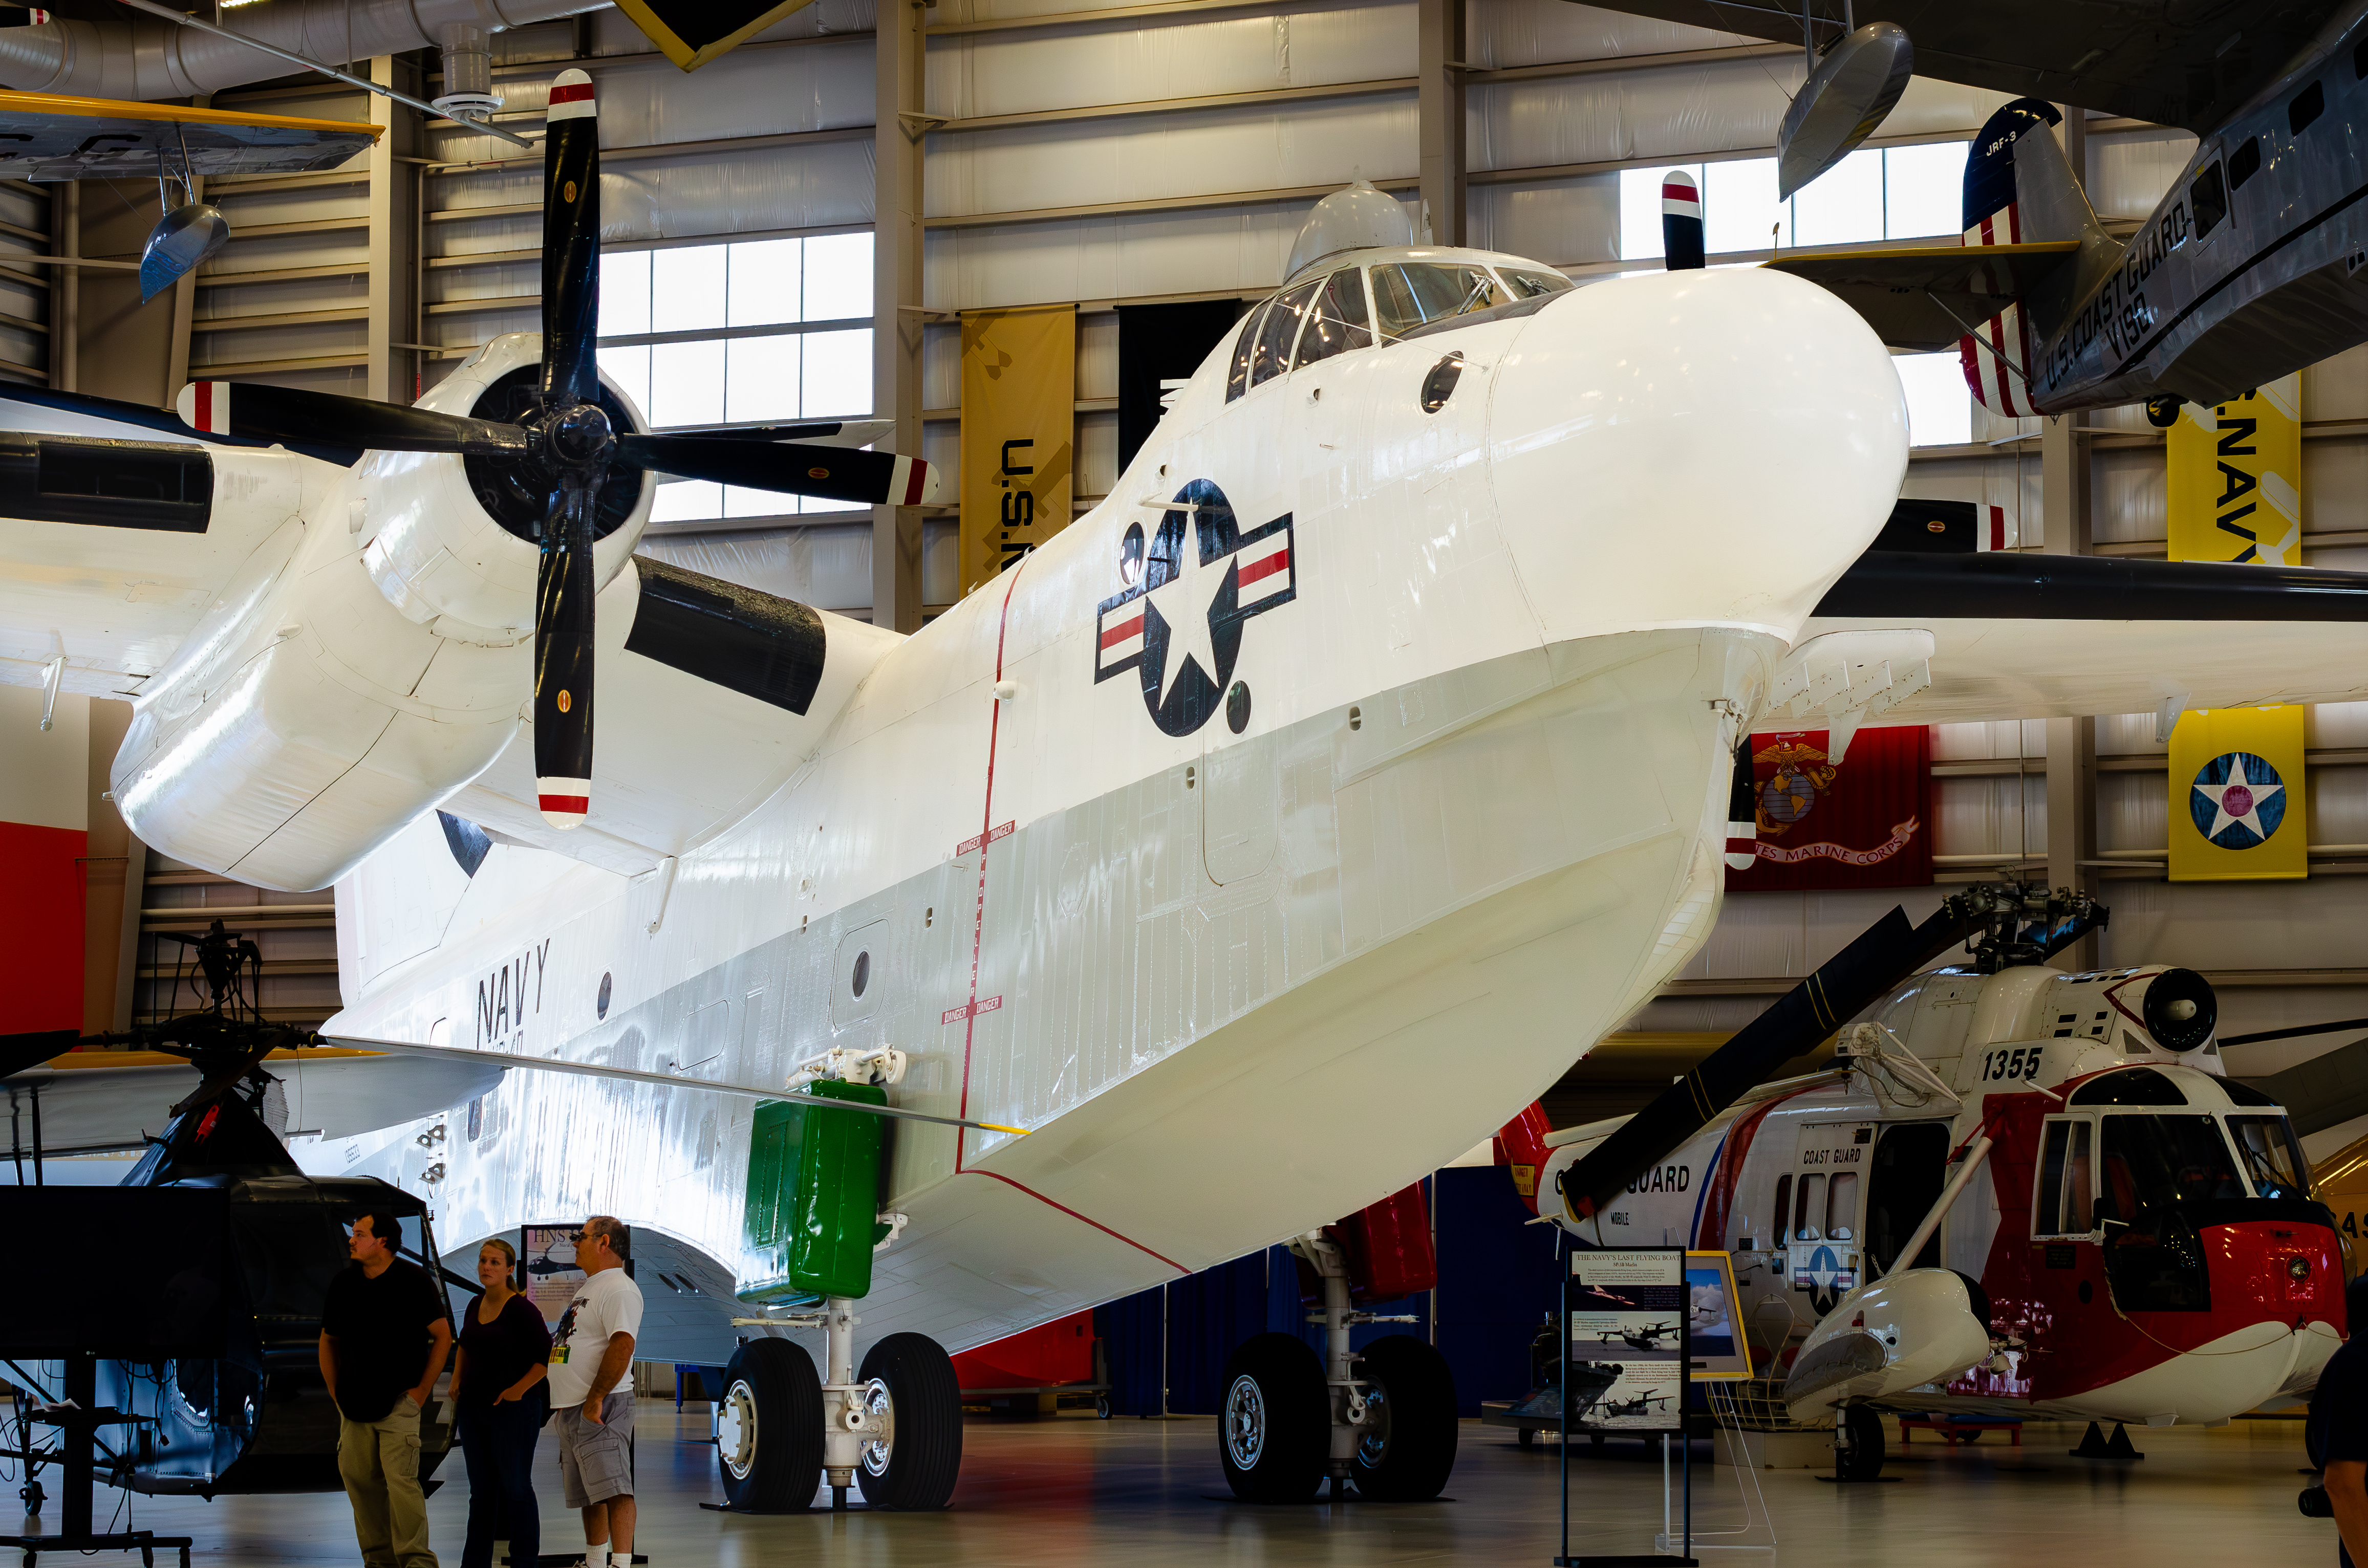 The National Naval Aviation Museum Trip Photography